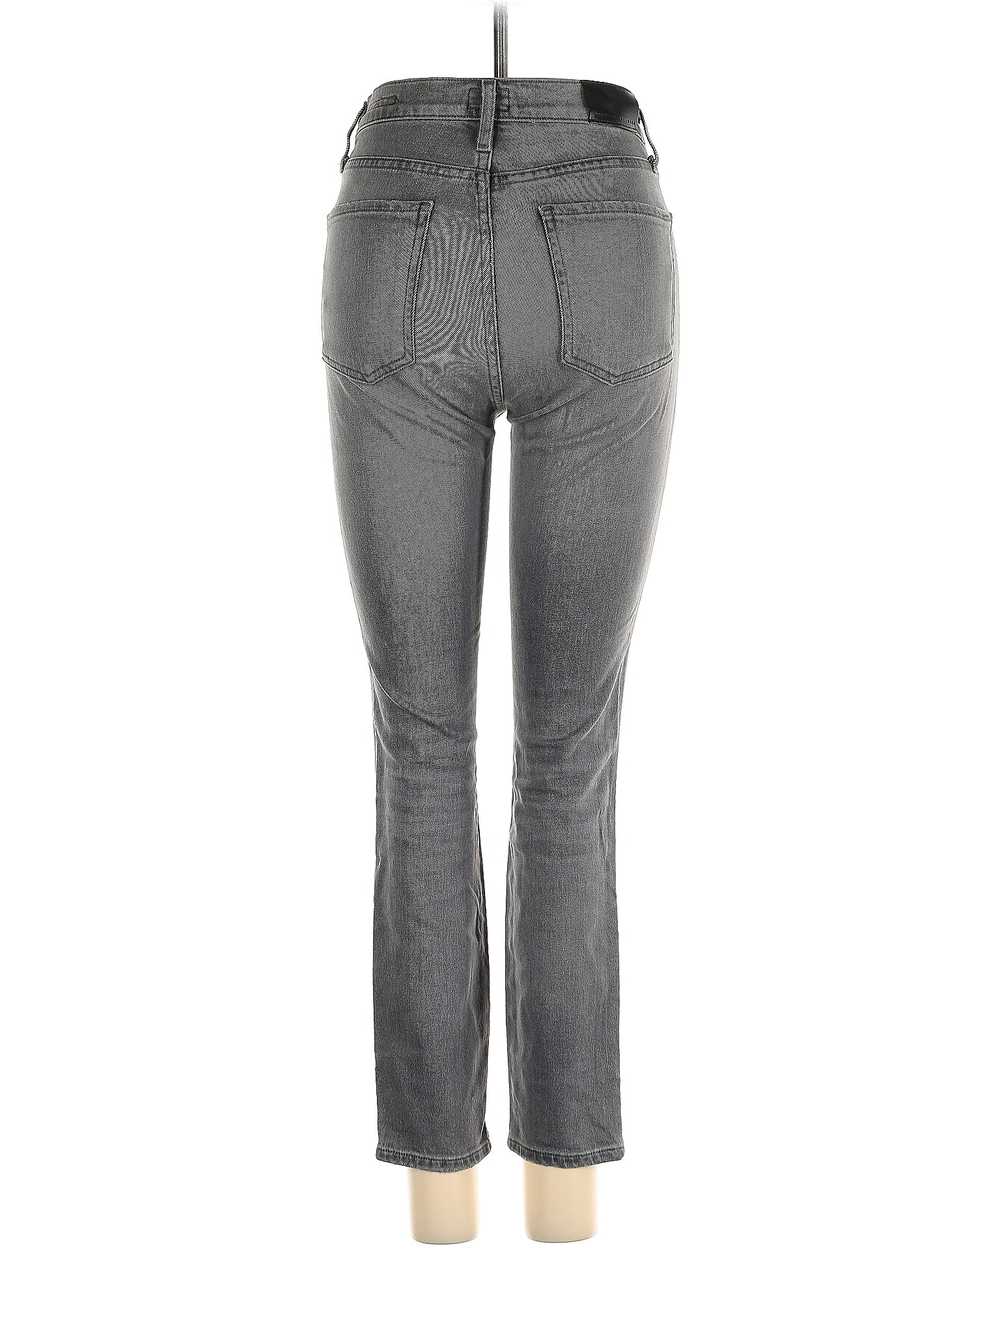 Citizens of Humanity Women Gray Jeans 23W - image 2